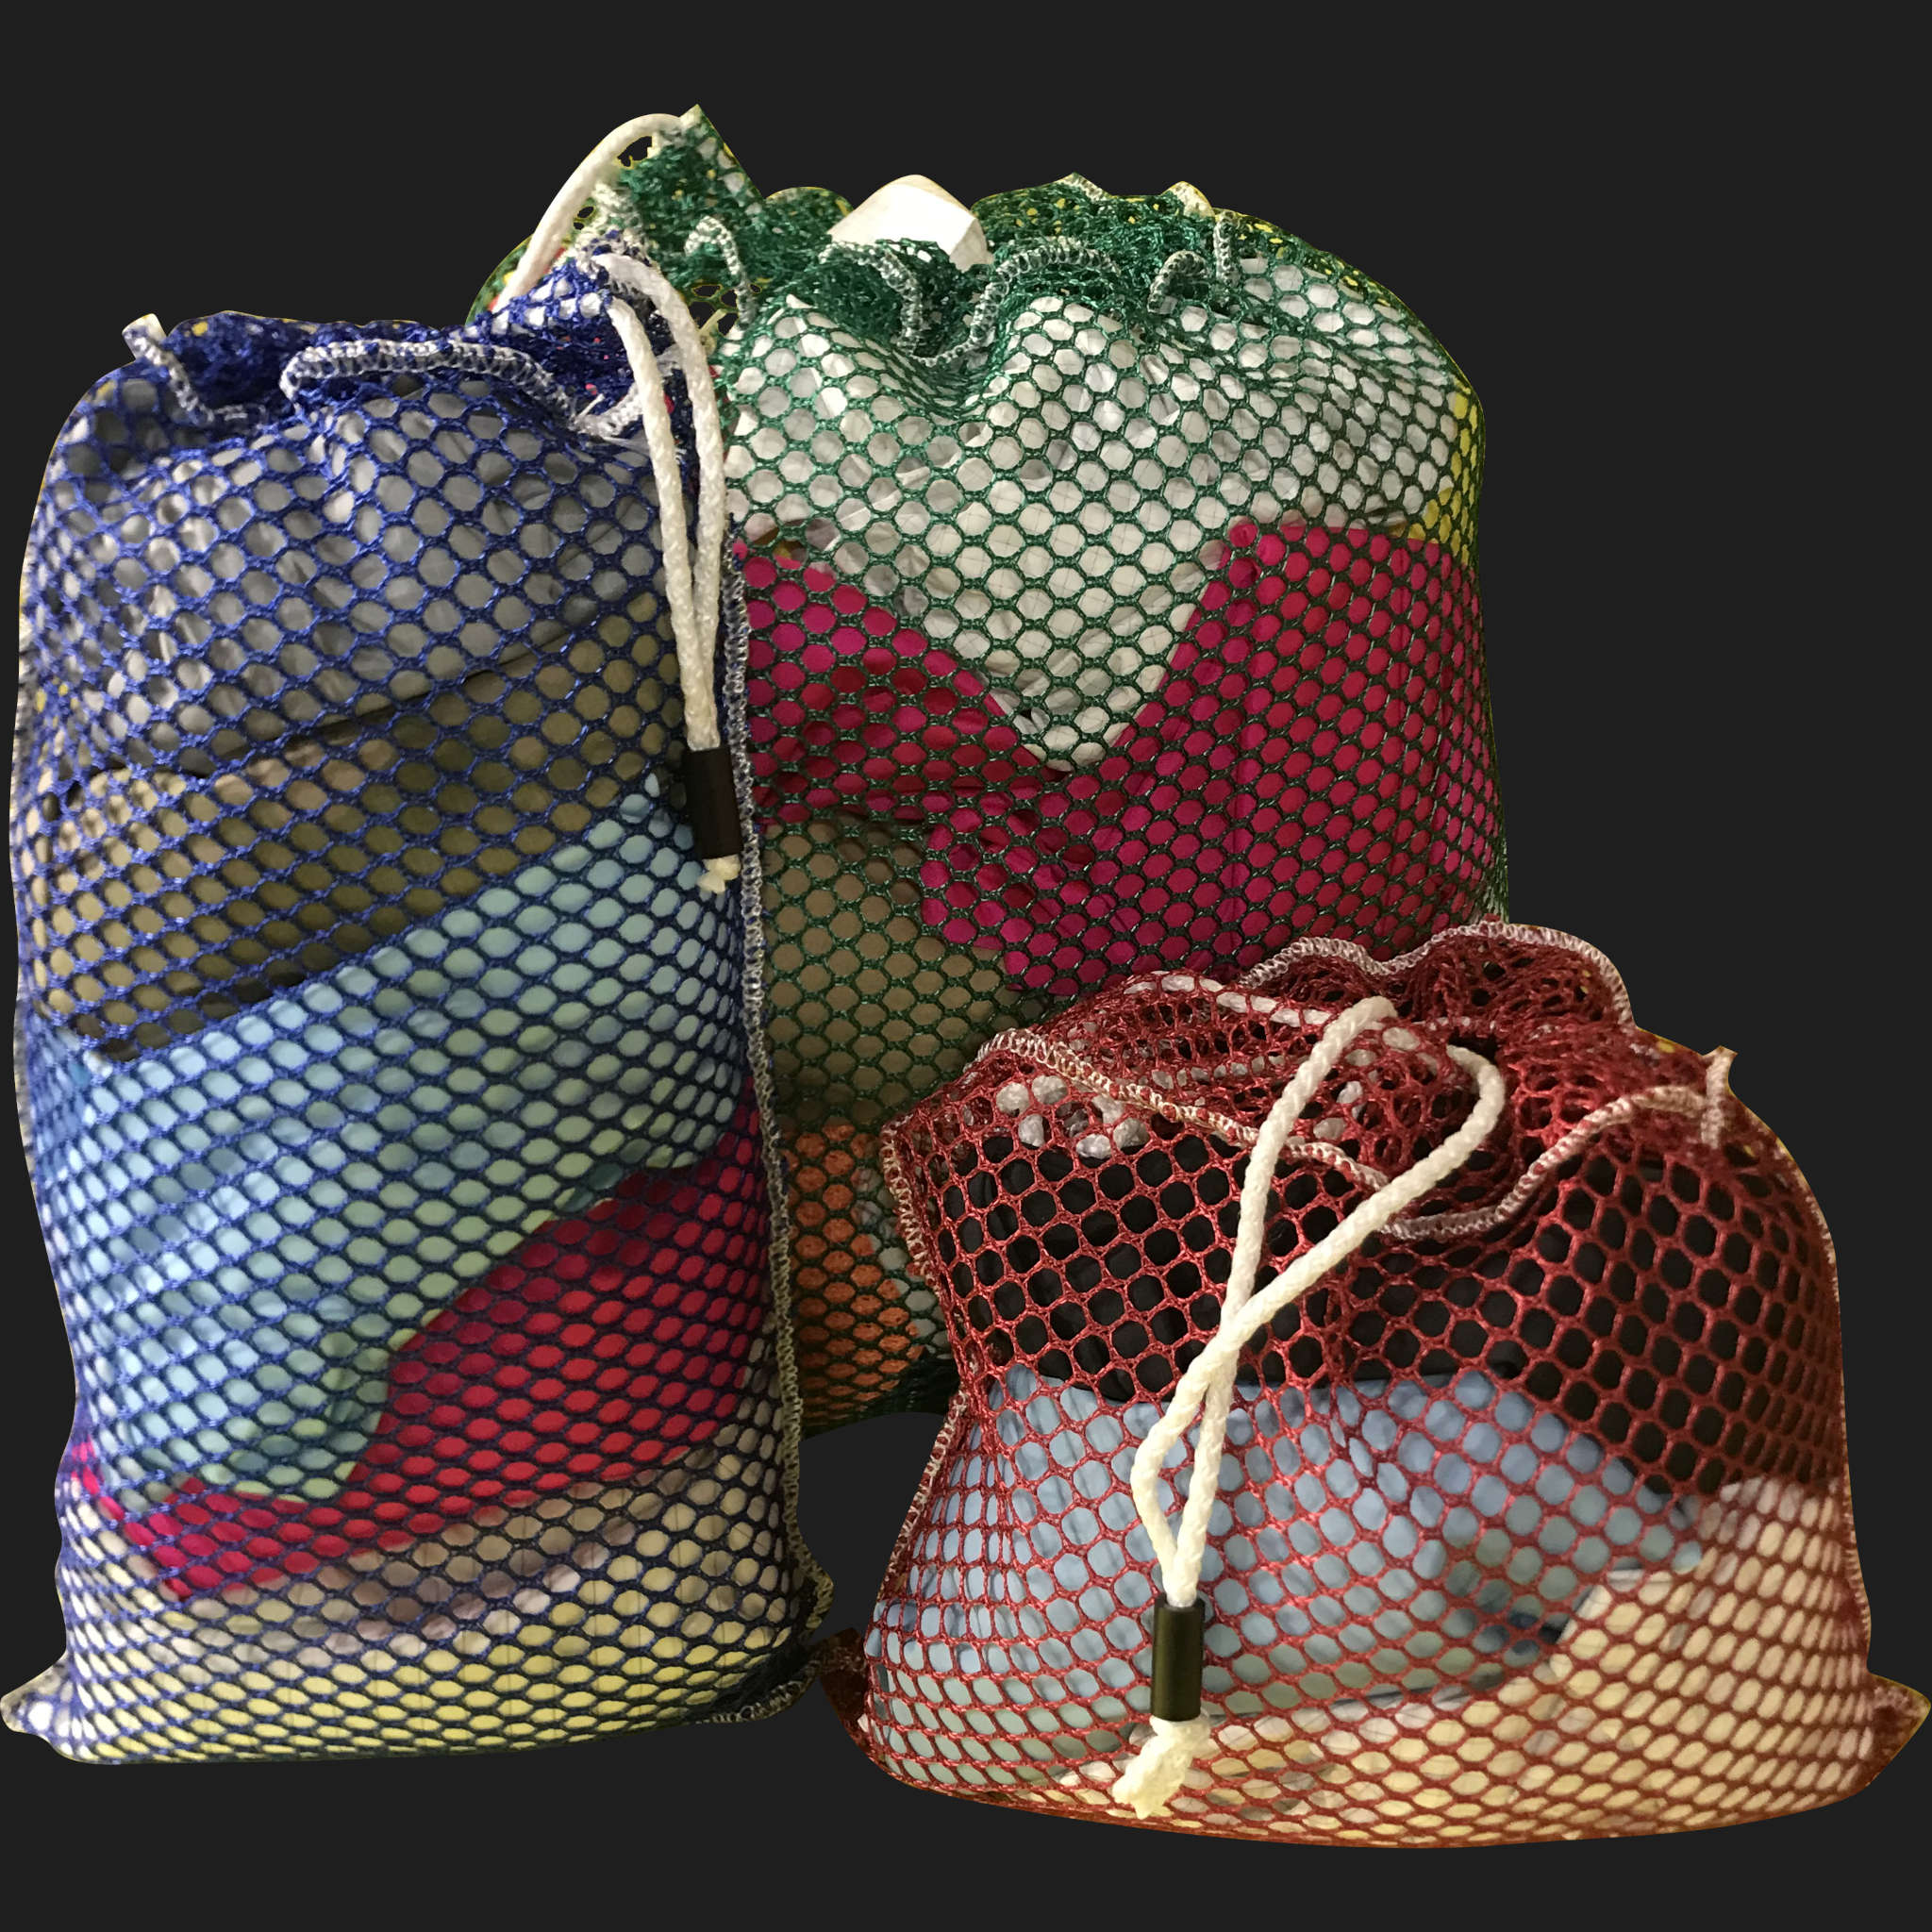 40" x 52" Customized Mesh-Net-Laundry Bags Heavy Duty with Cord and barrellock closure